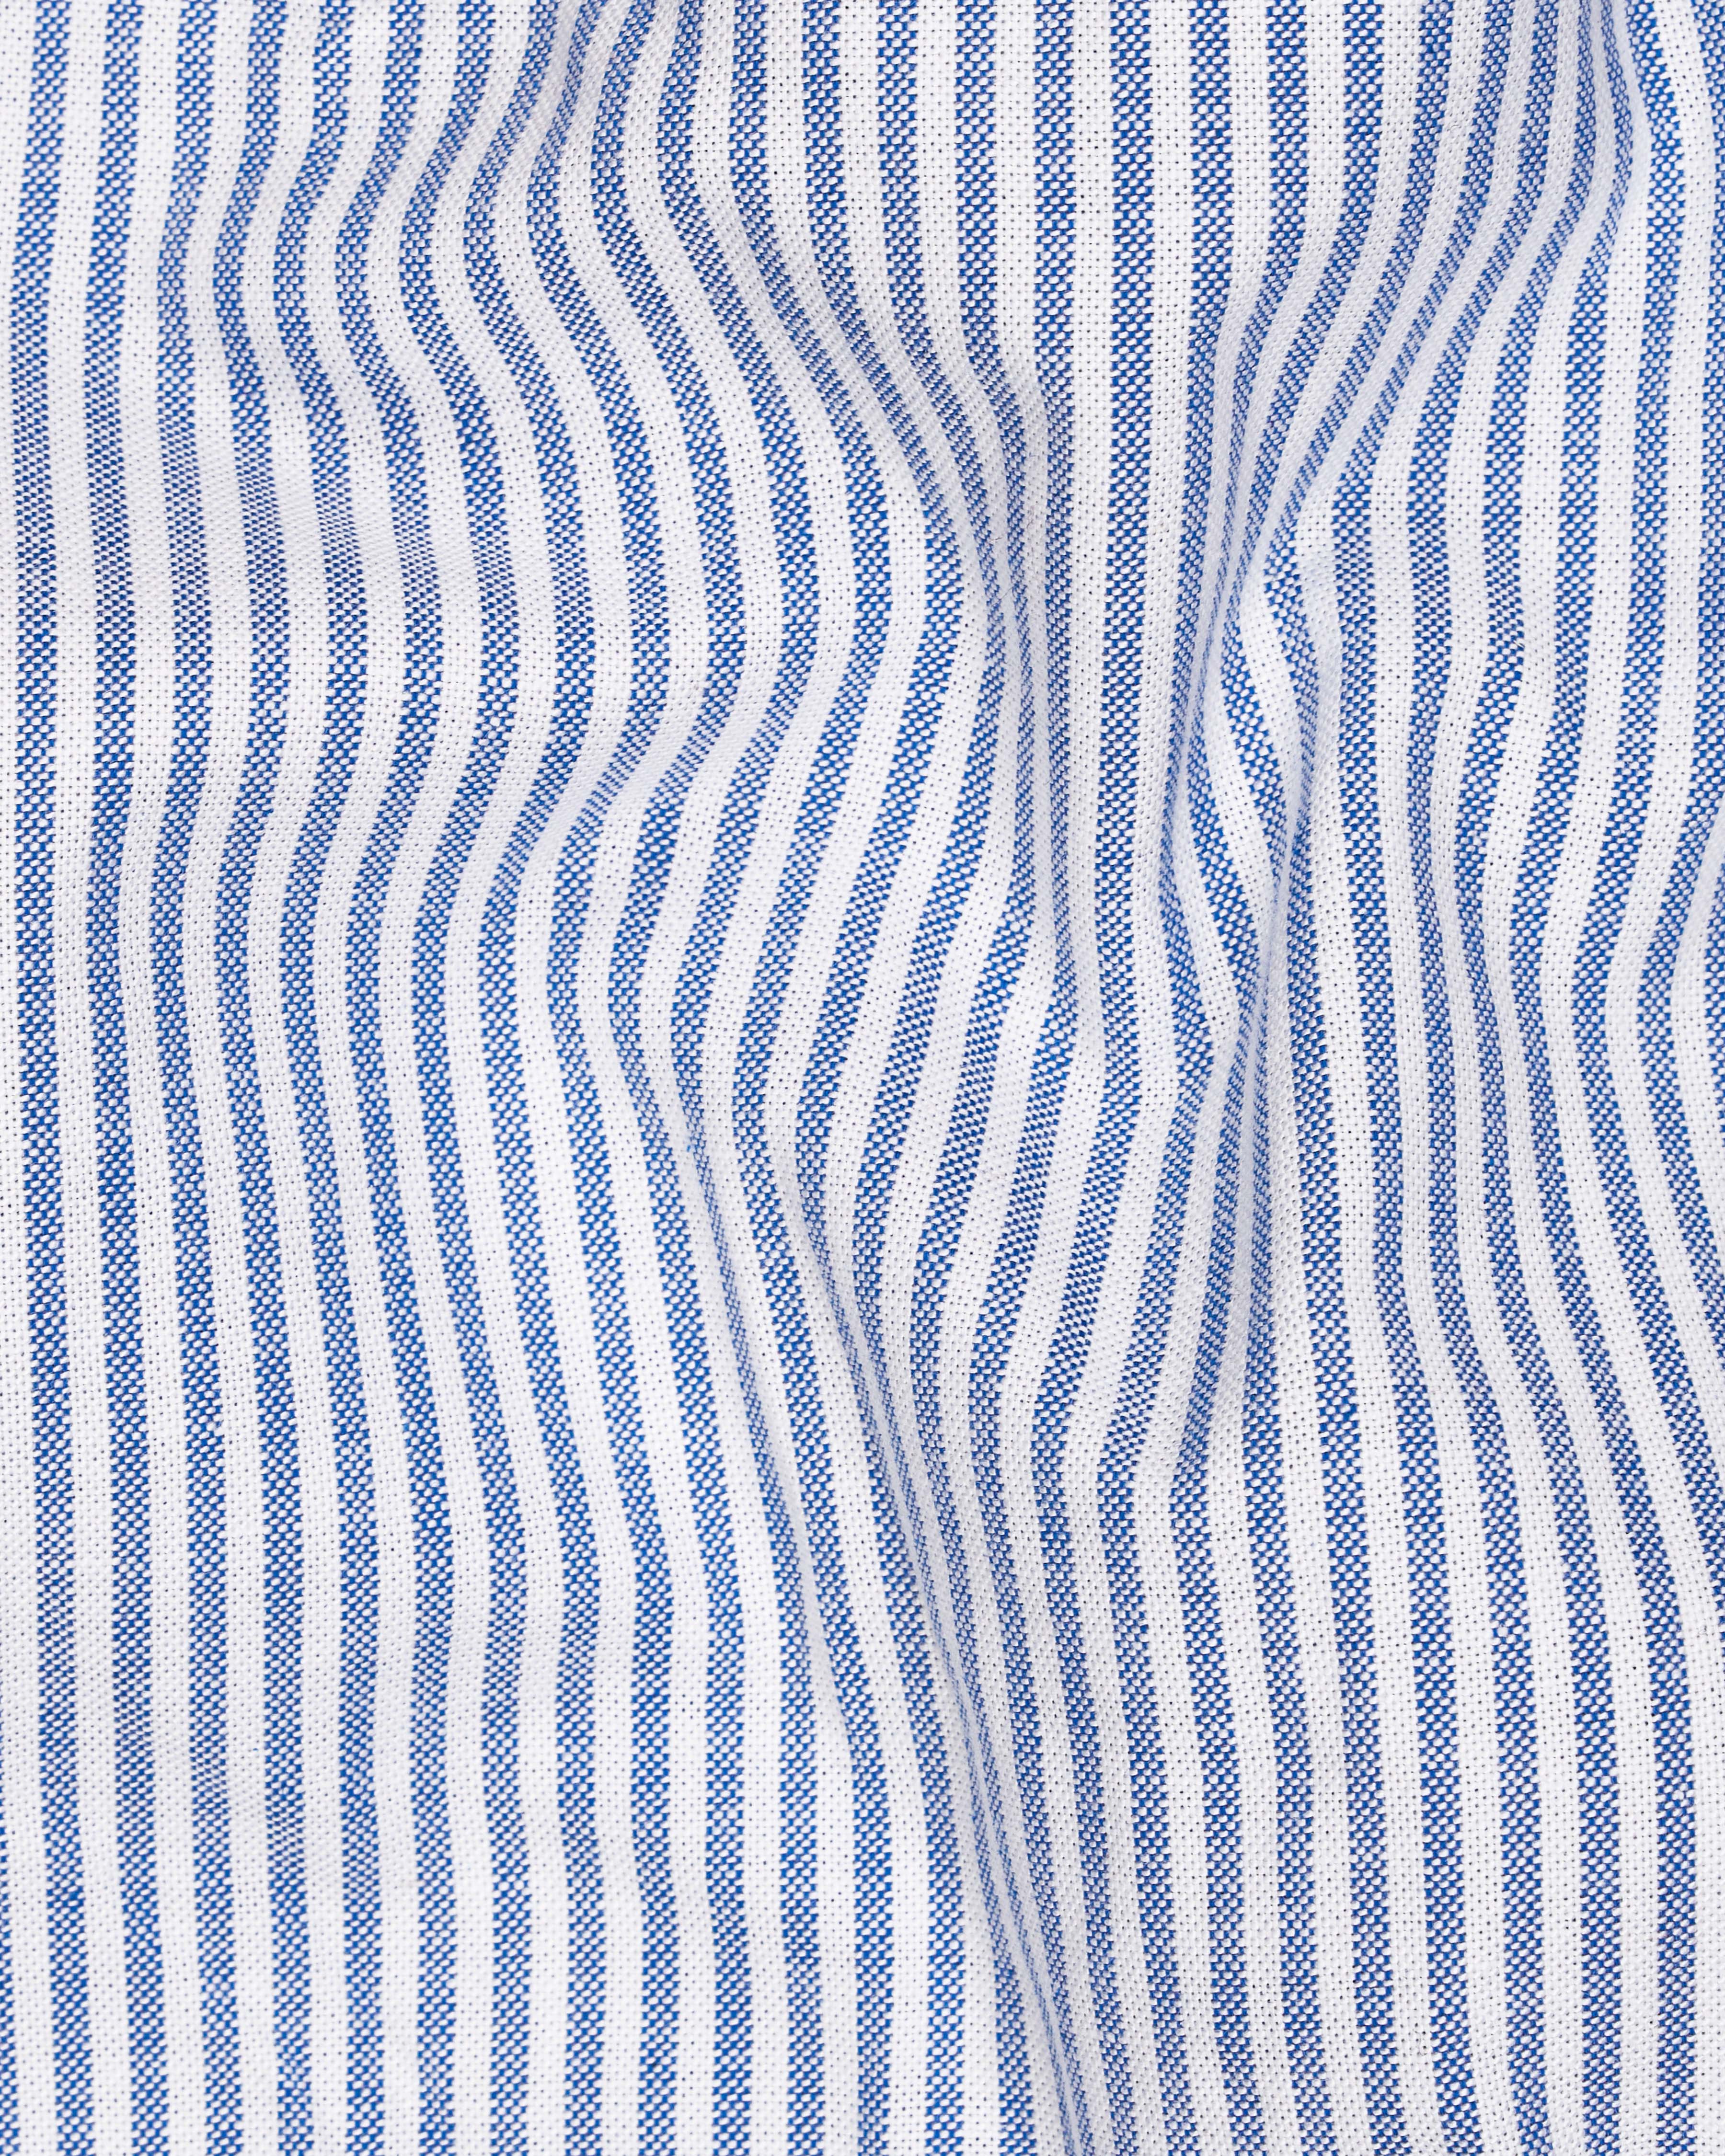 Glaucous Blue and White Pinstriped Royal Oxford Shirt  8749-BD-38,8749-BD-H-38,8749-BD-39,8749-BD-H-39,8749-BD-40,8749-BD-H-40,8749-BD-42,8749-BD-H-42,8749-BD-44,8749-BD-H-44,8749-BD-46,8749-BD-H-46,8749-BD-48,8749-BD-H-48,8749-BD-50,8749-BD-H-50,8749-BD-52,8749-BD-H-52